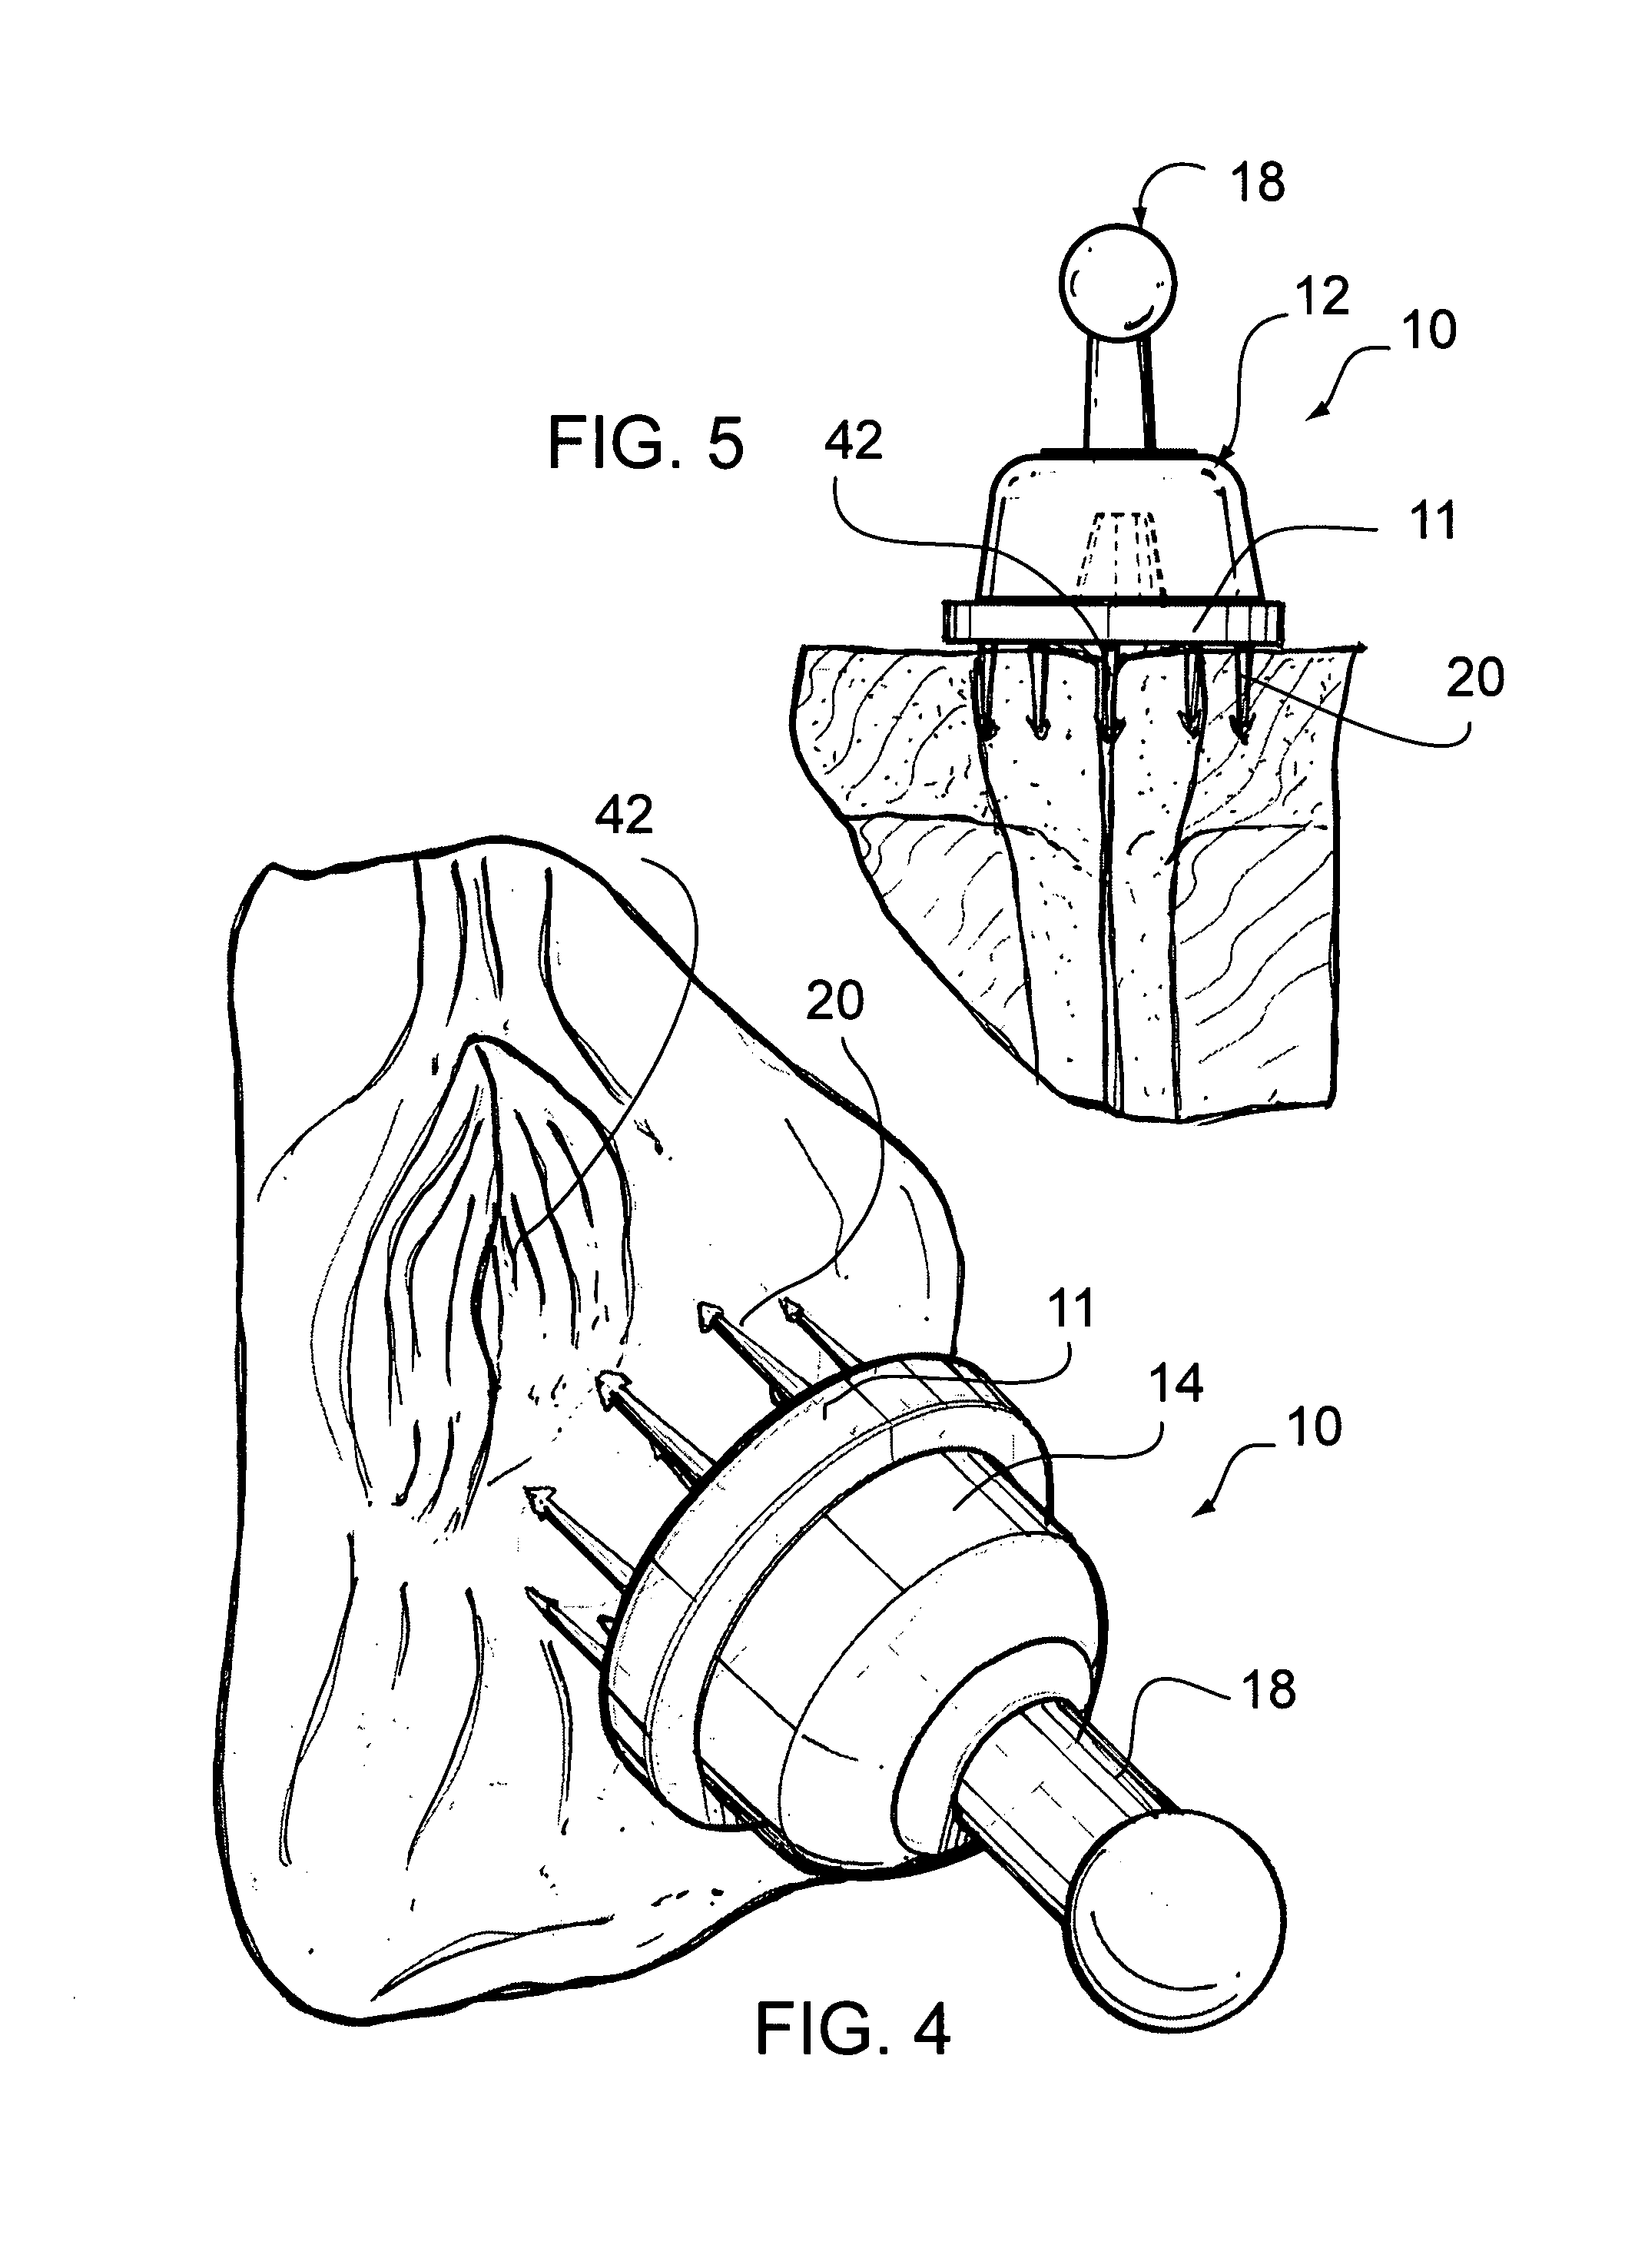 Apparatus and method for preventing fluid transfer between an oviduct and a uterine cavity